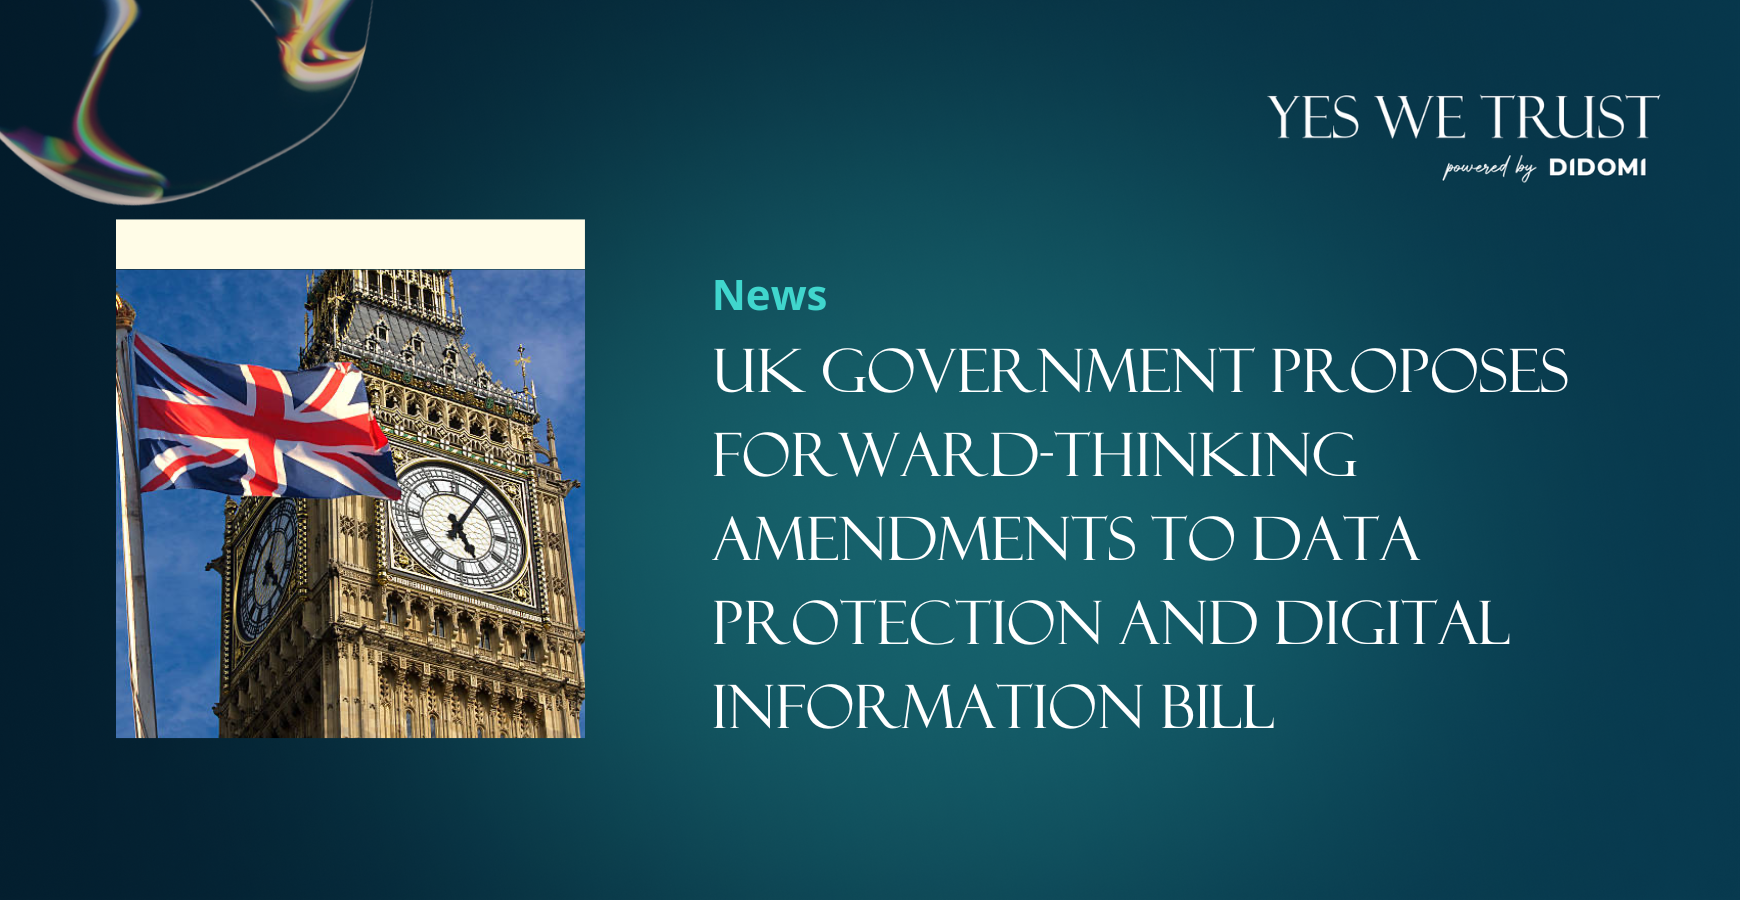 UK Government proposes amendments to Data Protection and Digital Information Bill